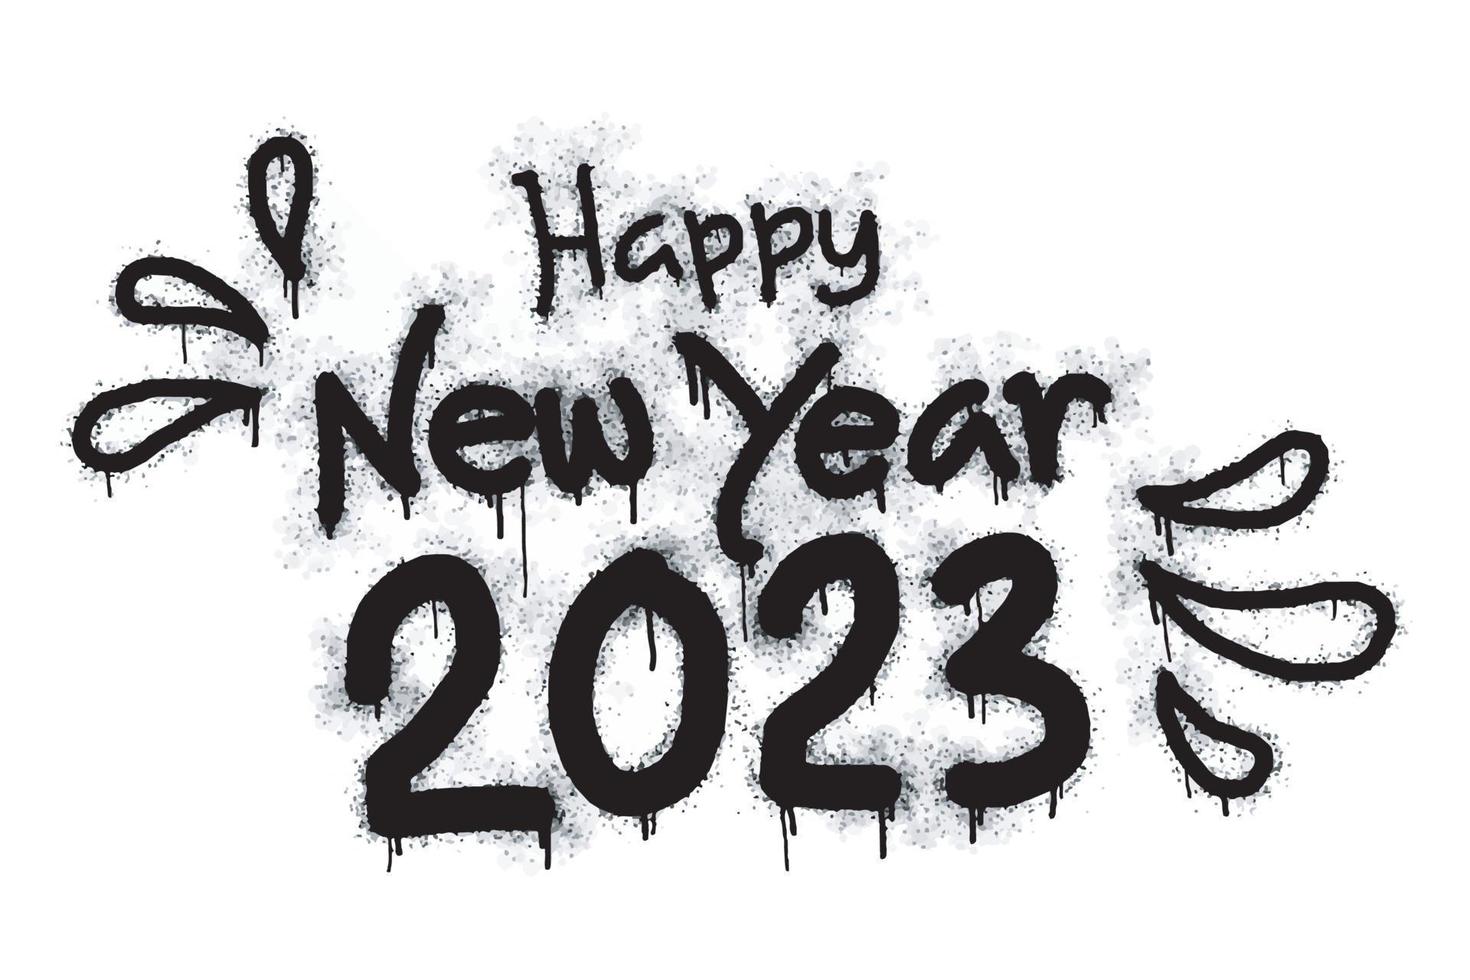 Happy 2023 New Year. Spray painted graffiti in black over white. Drops of sprayed happy new year words. isolated on white background. vector illustration